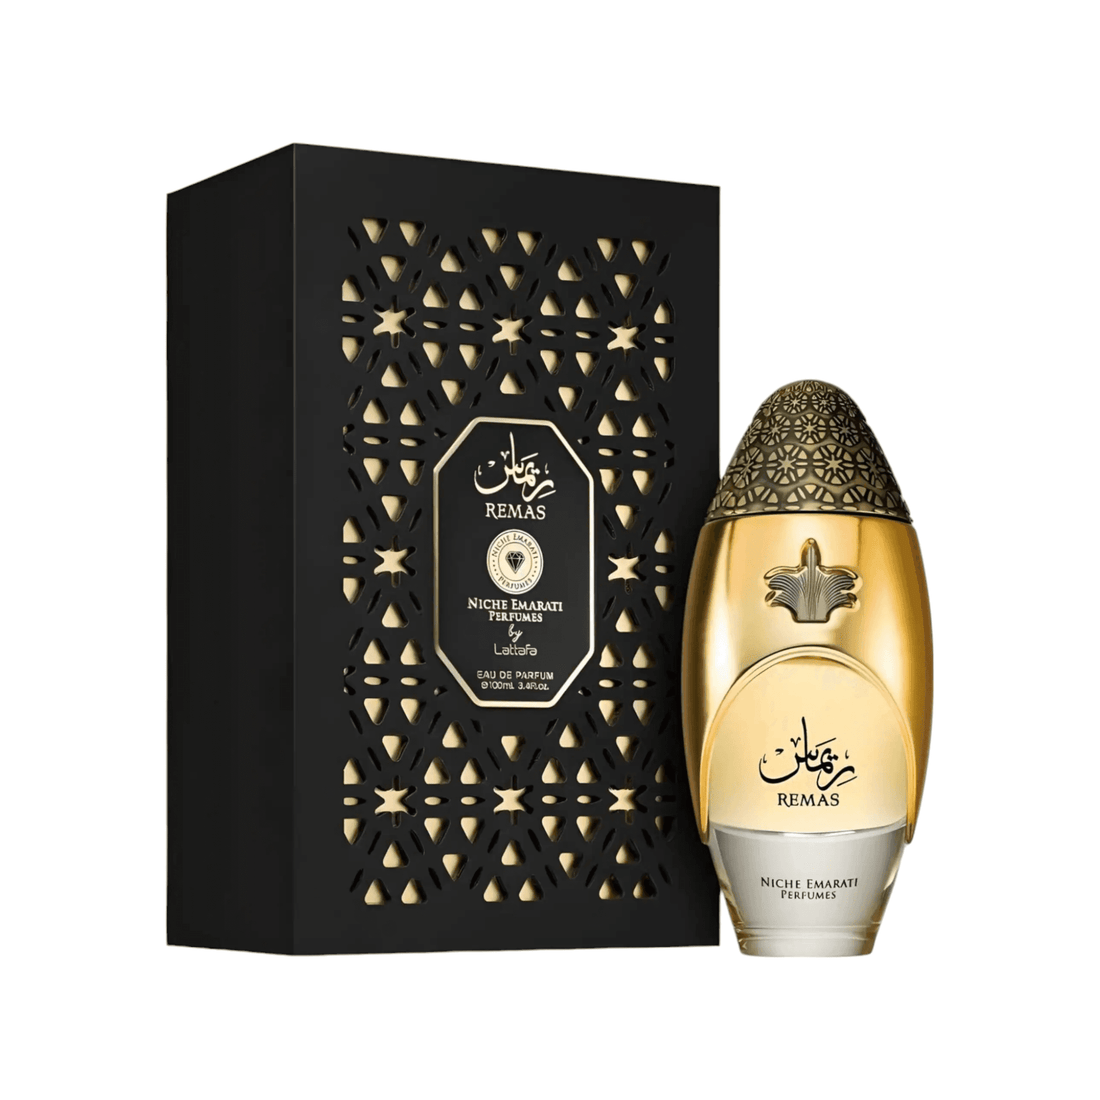 Sophisticated 100ml bottle of Remas Perfume by Niche Emarati Perfumes, encapsulating its blend of citrus, floral, and oriental notes.